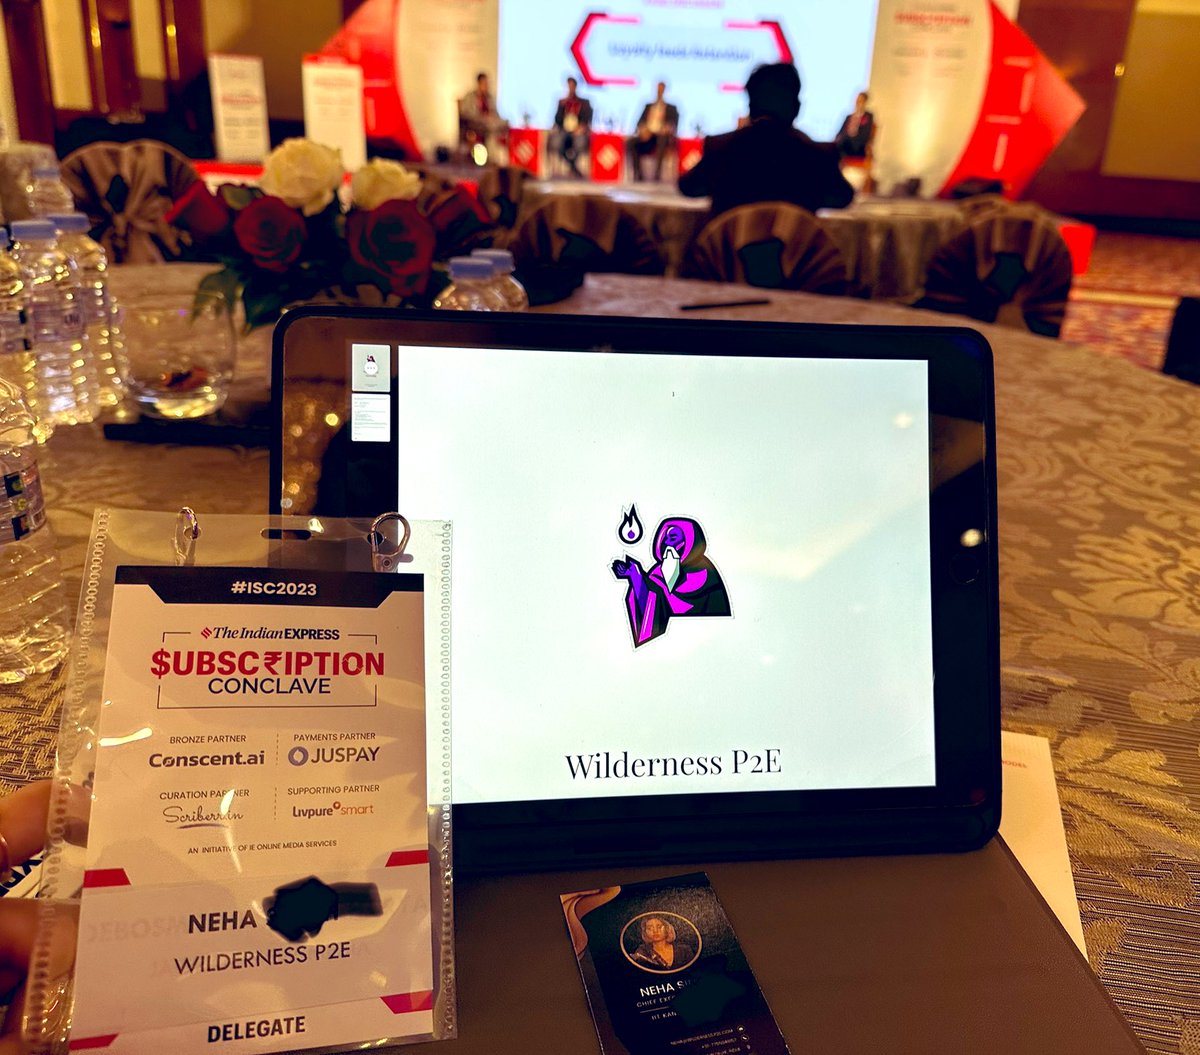 Late gm coz Wilderness P2E was at the Subscription Conclave at #ICS2023 today🚀

Good times talking Fintech x Web3 and upcoming disruptive solutions📈